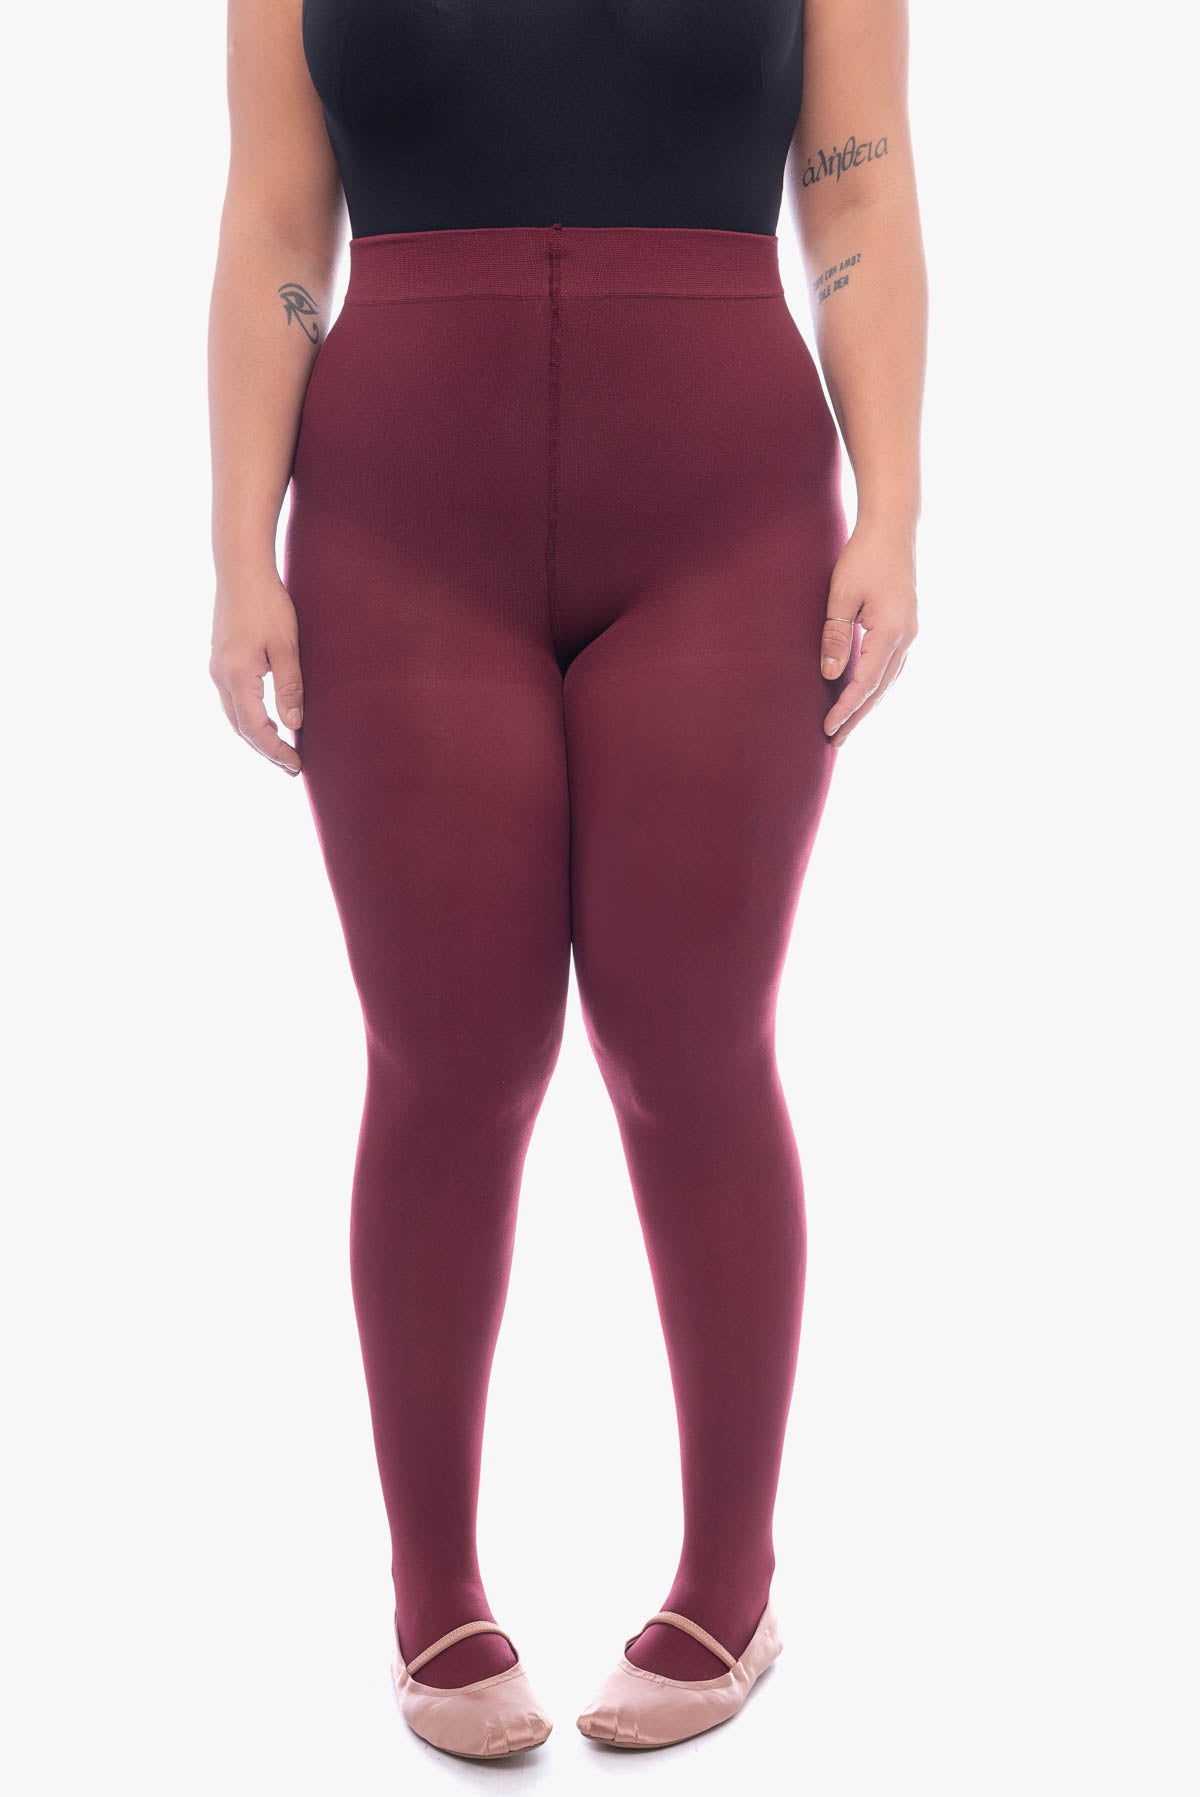 AMI thick super-stretchy tights